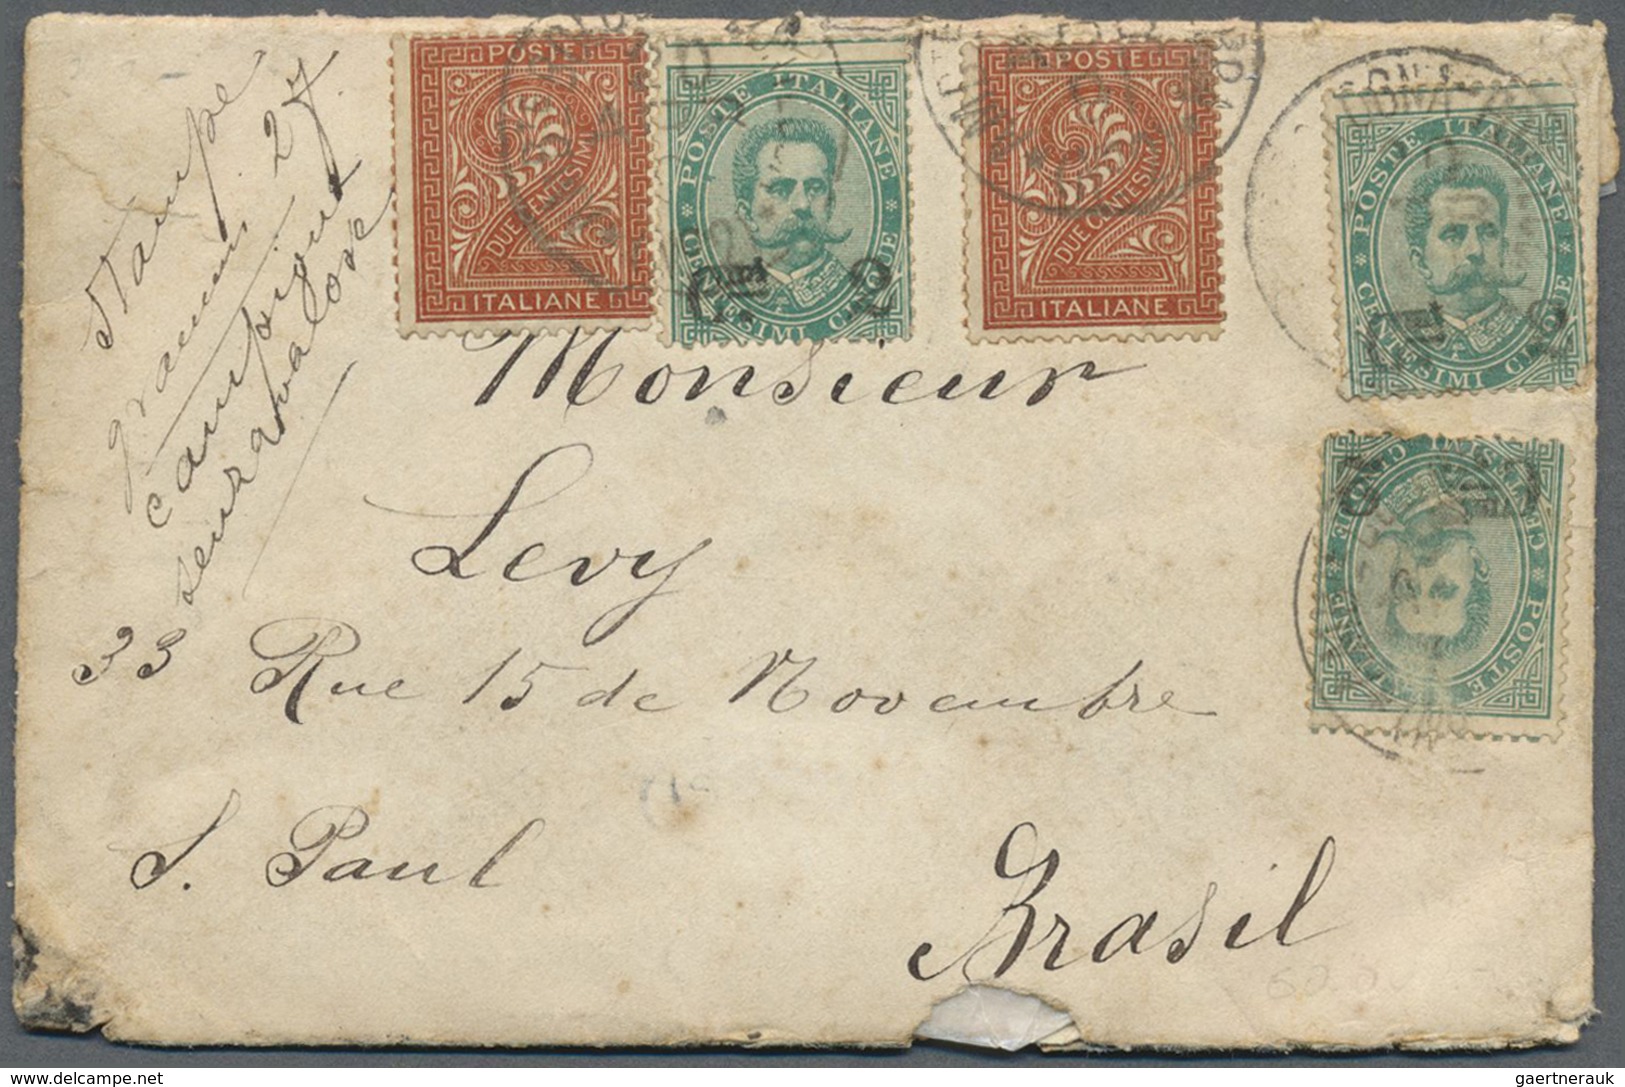 Br Italien: 1891. Letter With Three Times 2c On 5 Cmi King Umberto I And Two Times 2c Cipher From "Bolo - Marcophilie